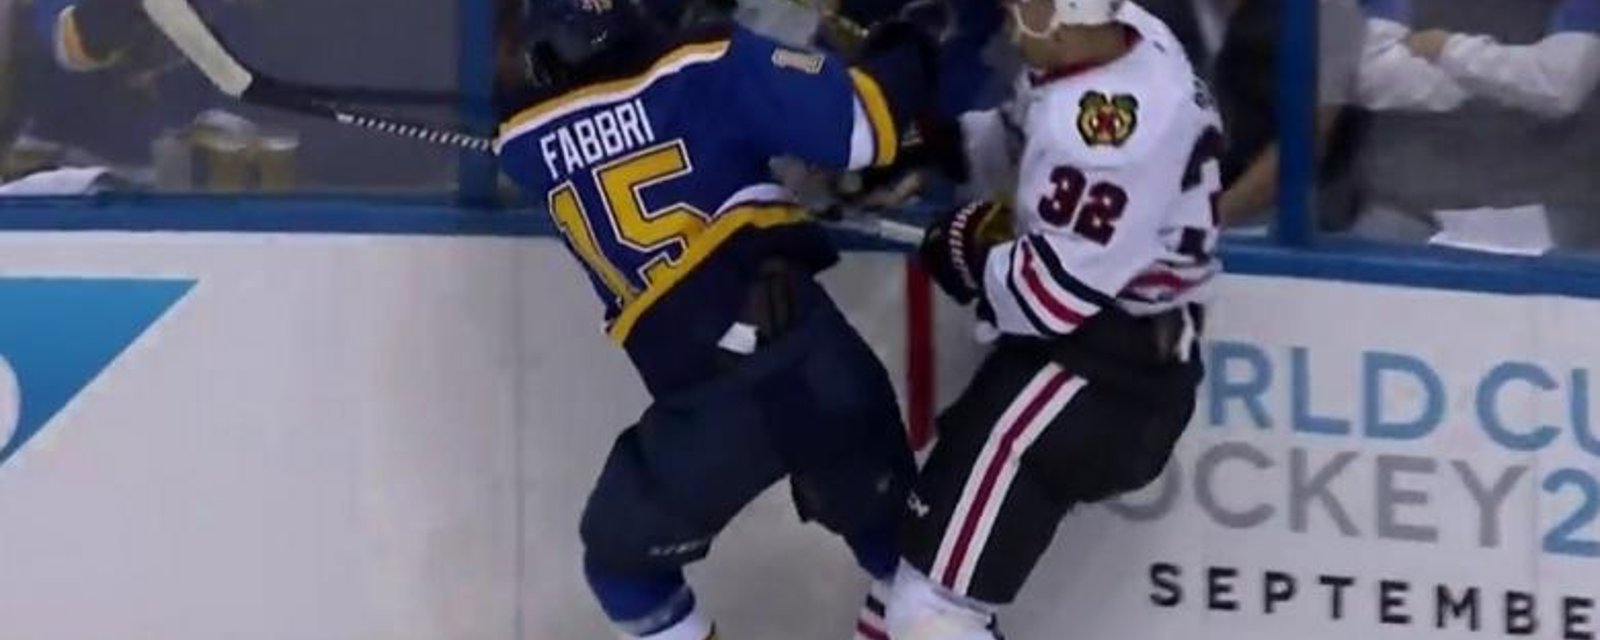 After eating a crosscheck Fabbri responds with a clean and devastating hit.